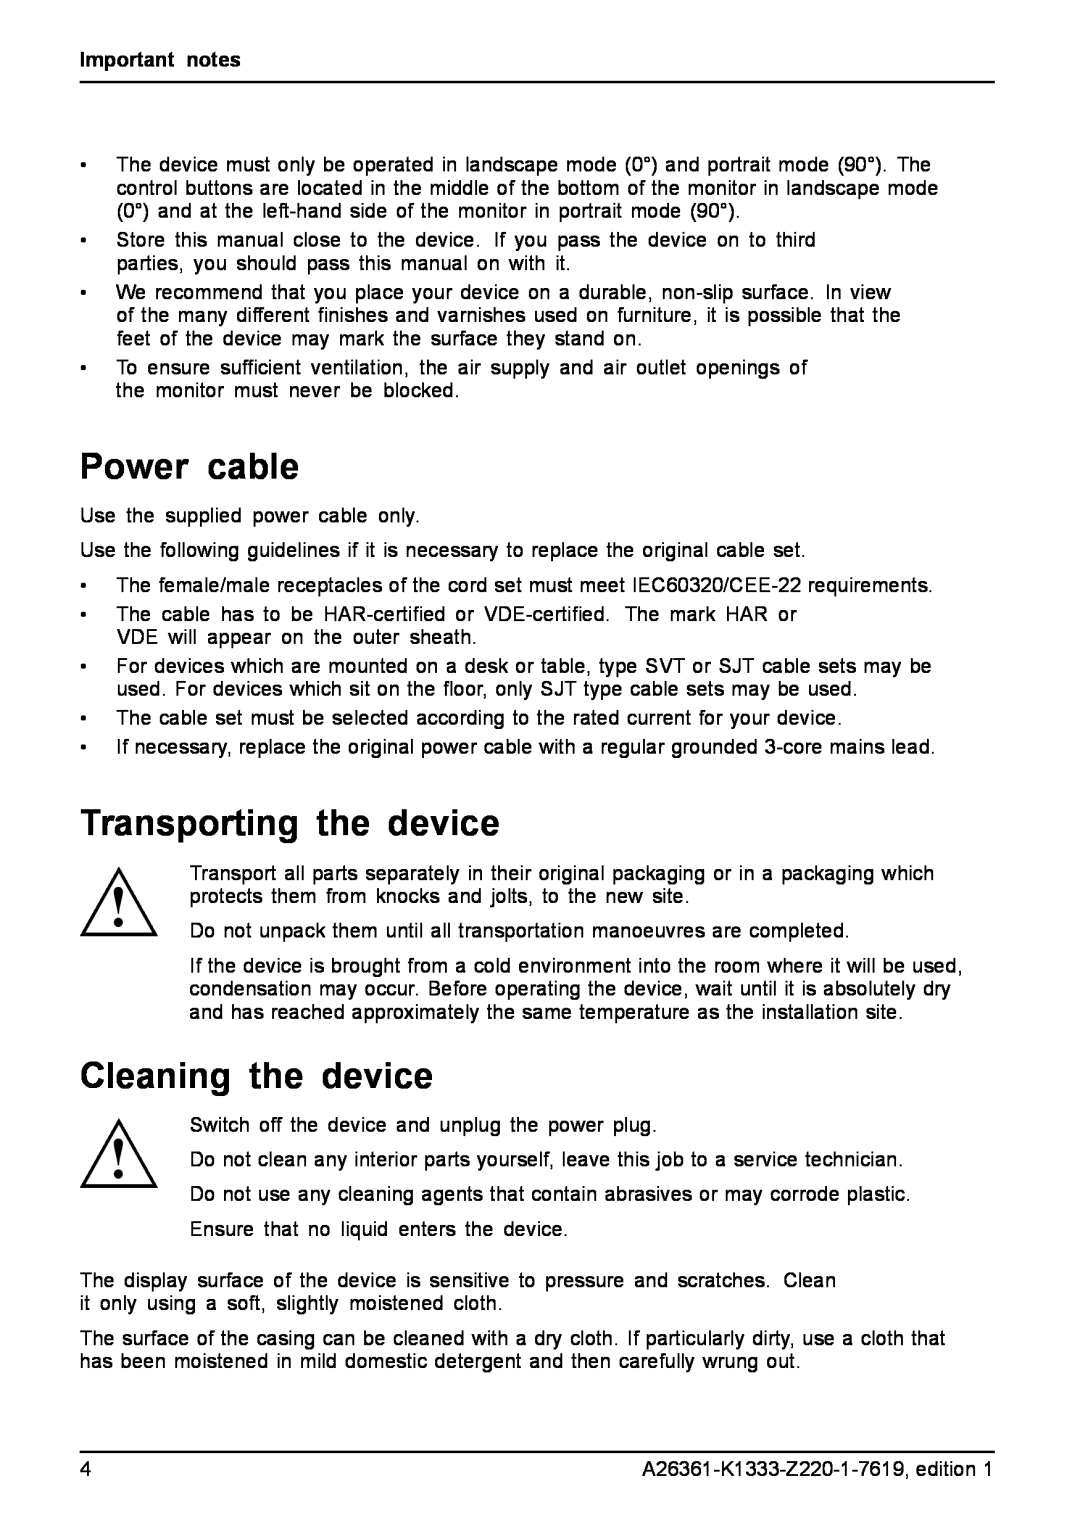 Fujitsu B19W-5 ECO manual Power cable, Transporting the device, Cleaning the device, Important notes 